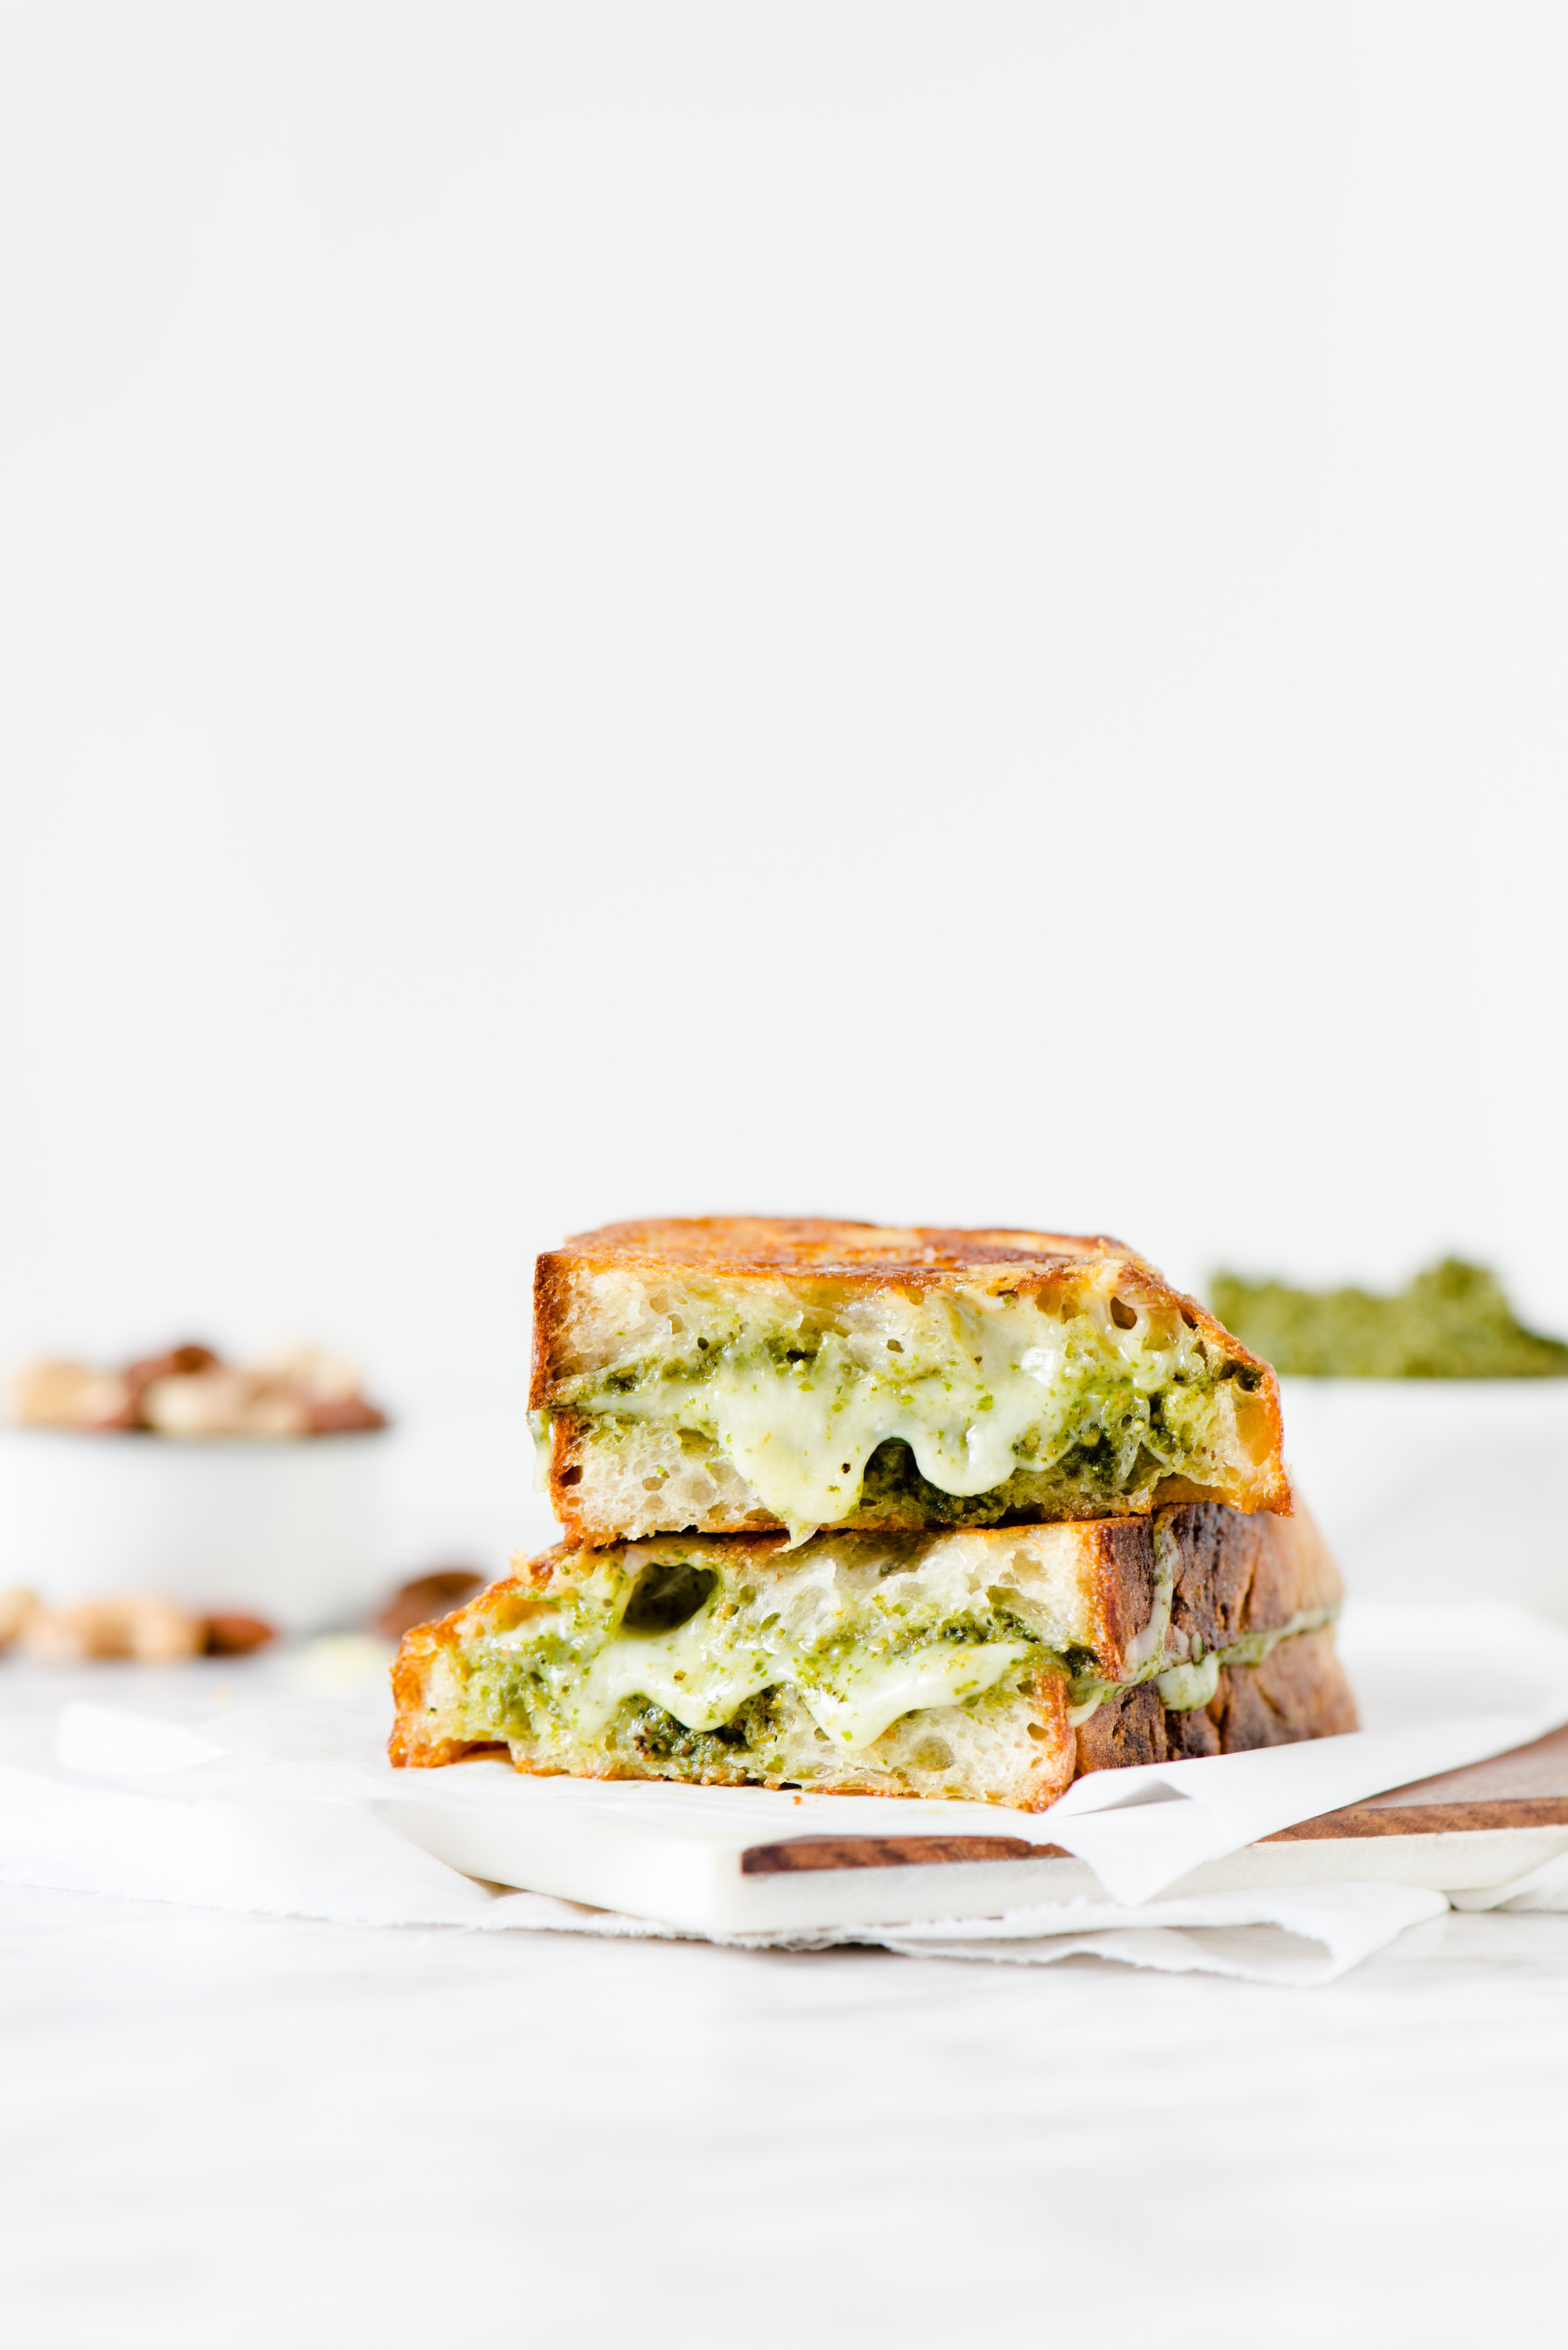 Pesto & Gouda Grilled Cheese - Gooey, herby goodness, sandwiched between two fresh pieces of sourdough bread.